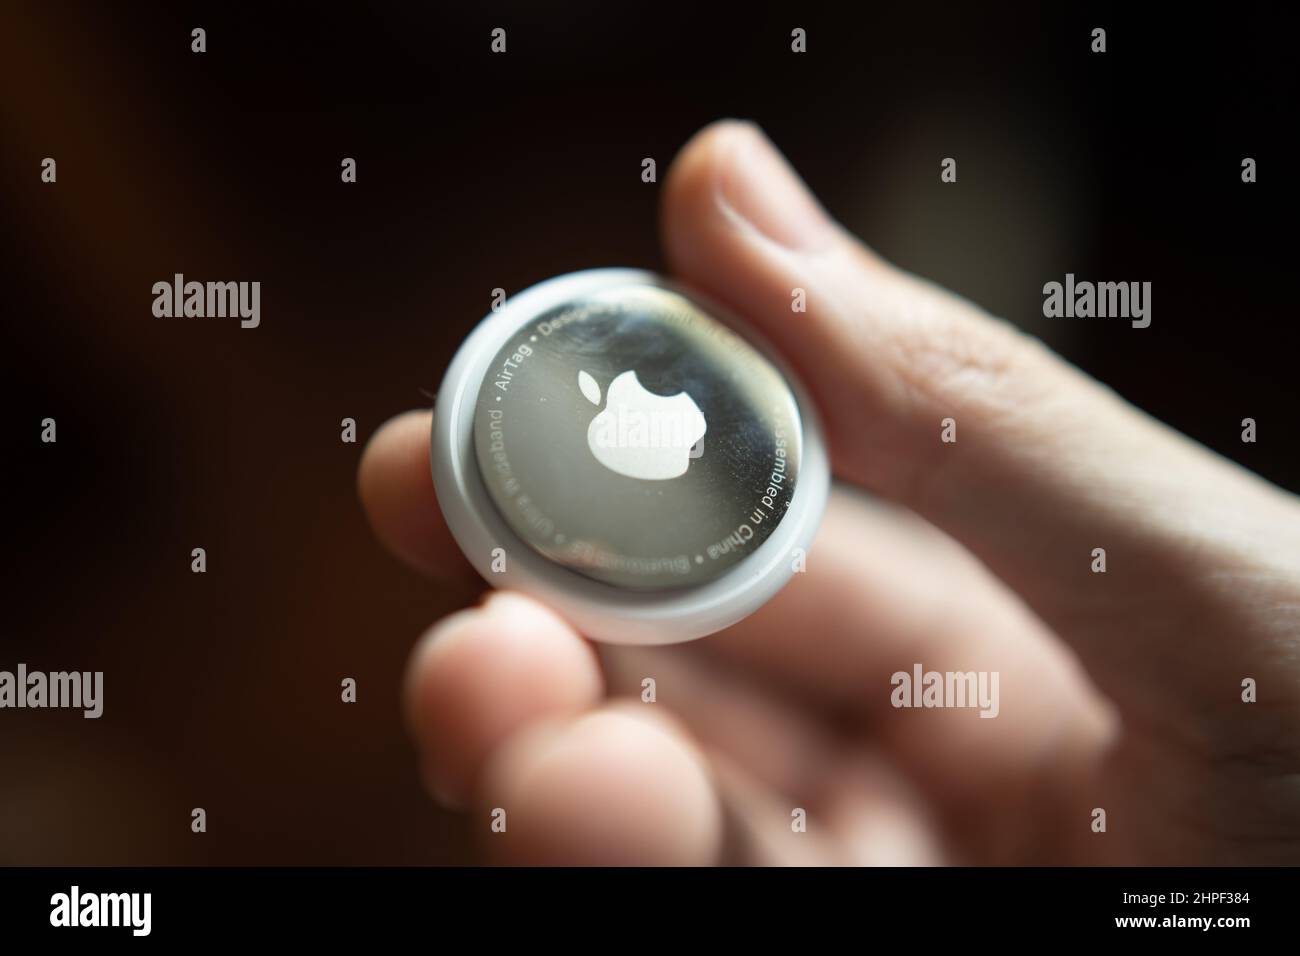 Bangkok, Thailand - Febrauary 5, 2022: AirTag is a tracking device developed by Apple. Stock Photo